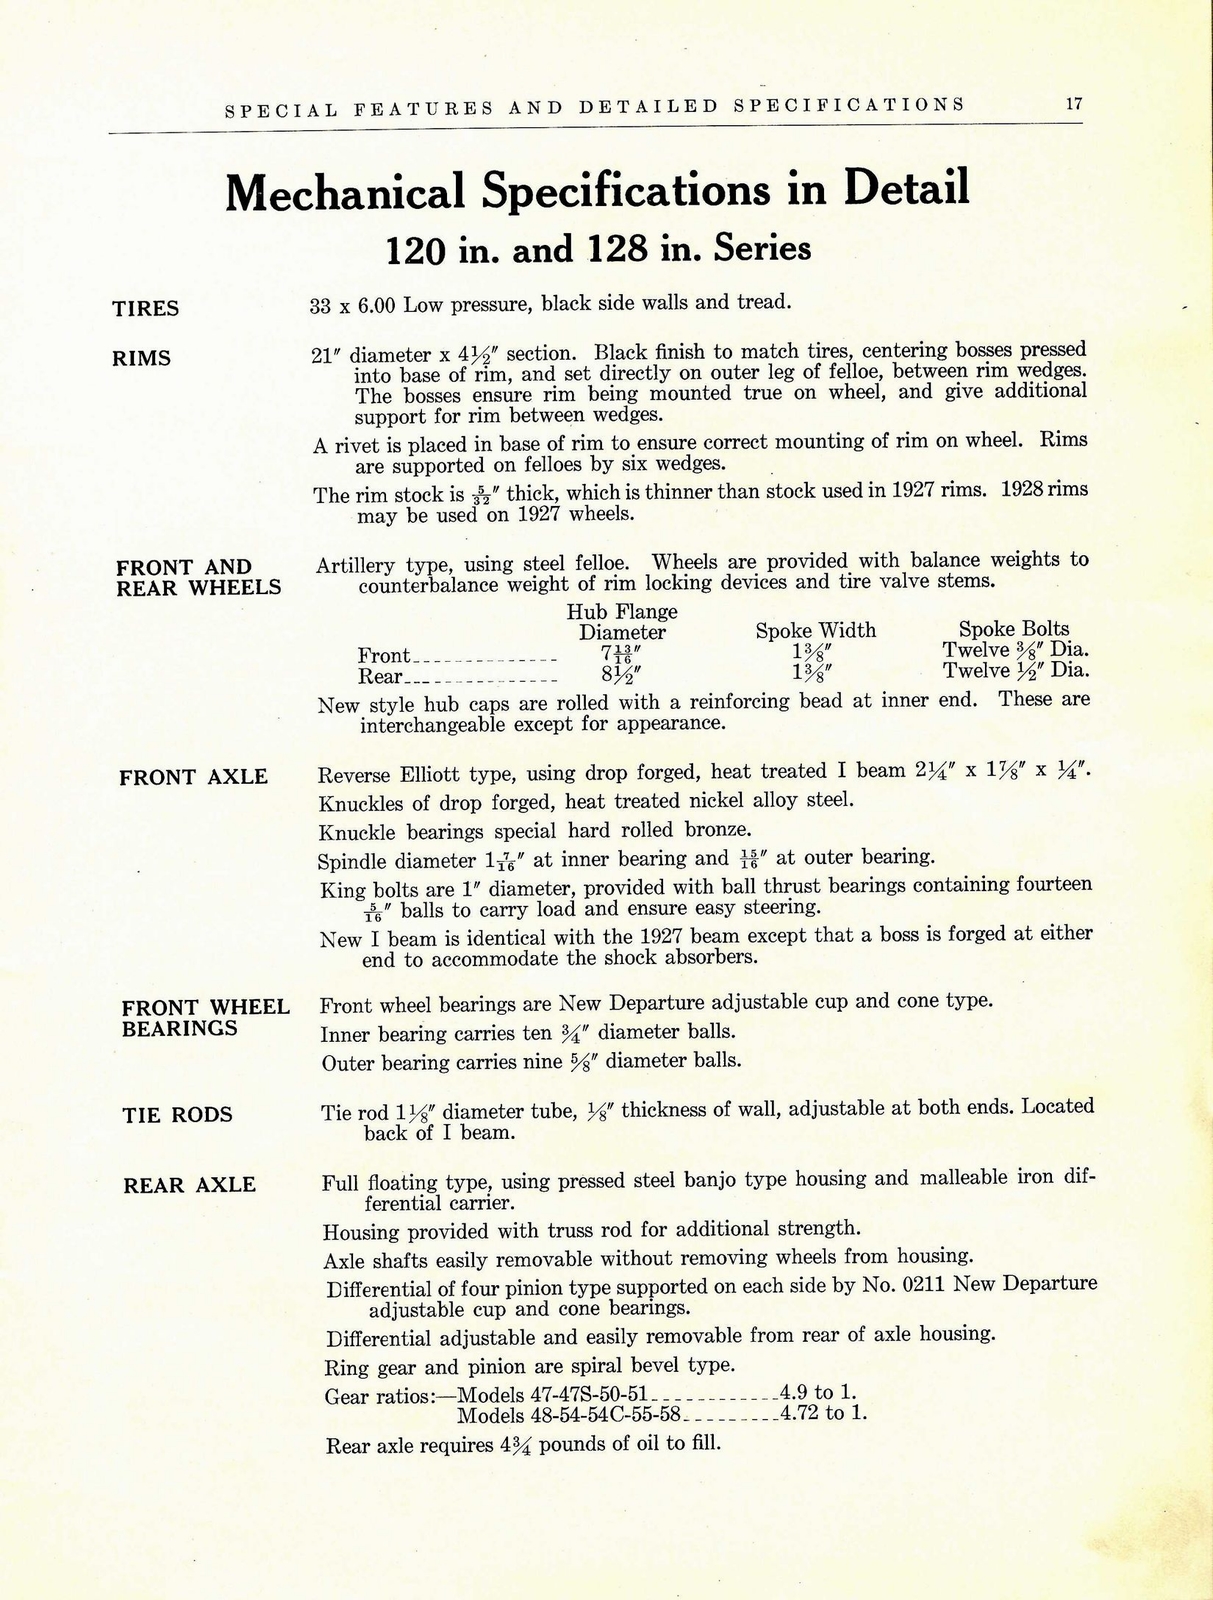 n_1928 Buick Special Features and  Specs-17.jpg